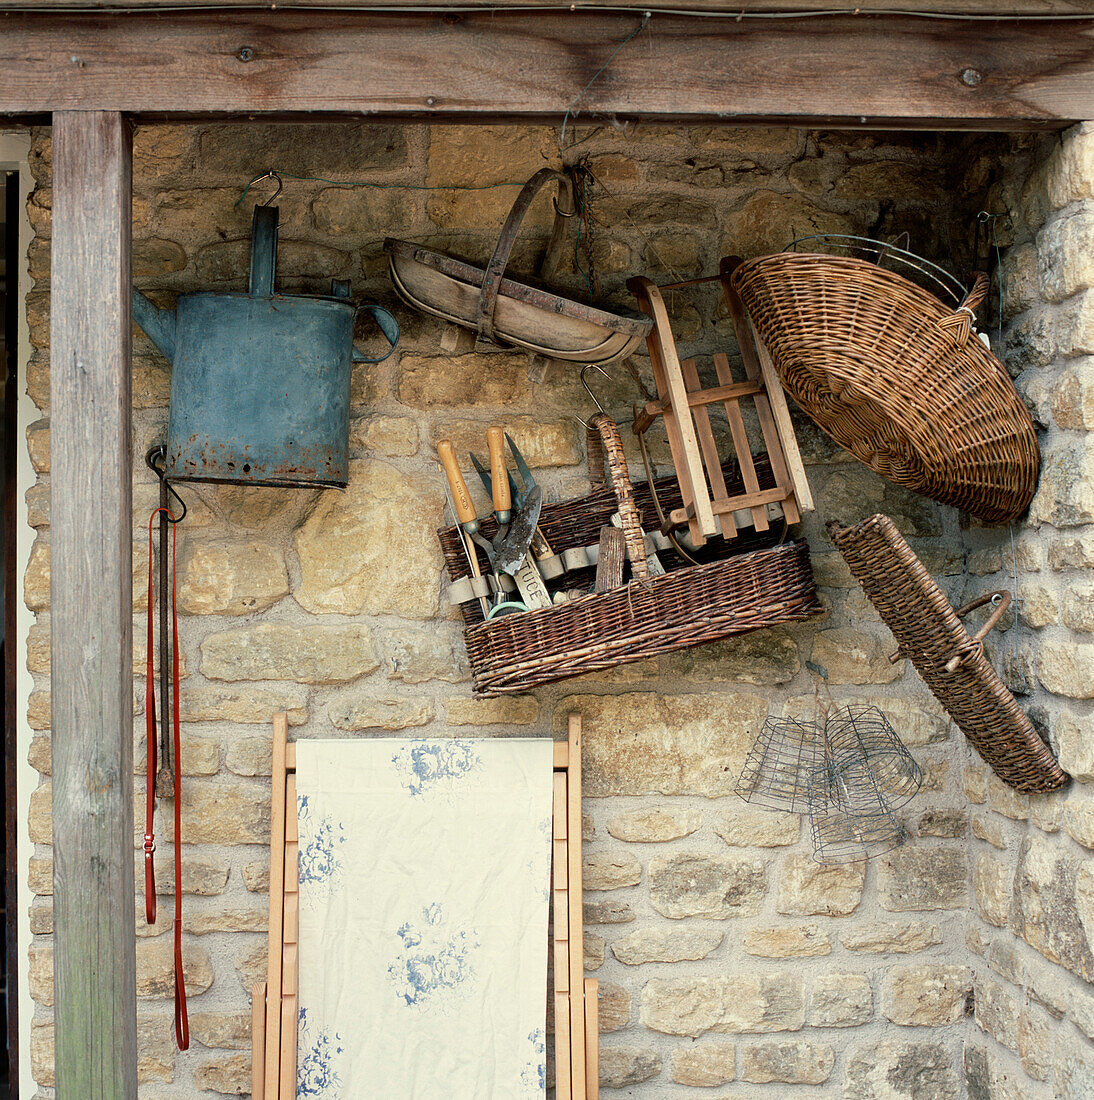 Stone walled shed with collection of gardening baskets and trugs hanging on the wall